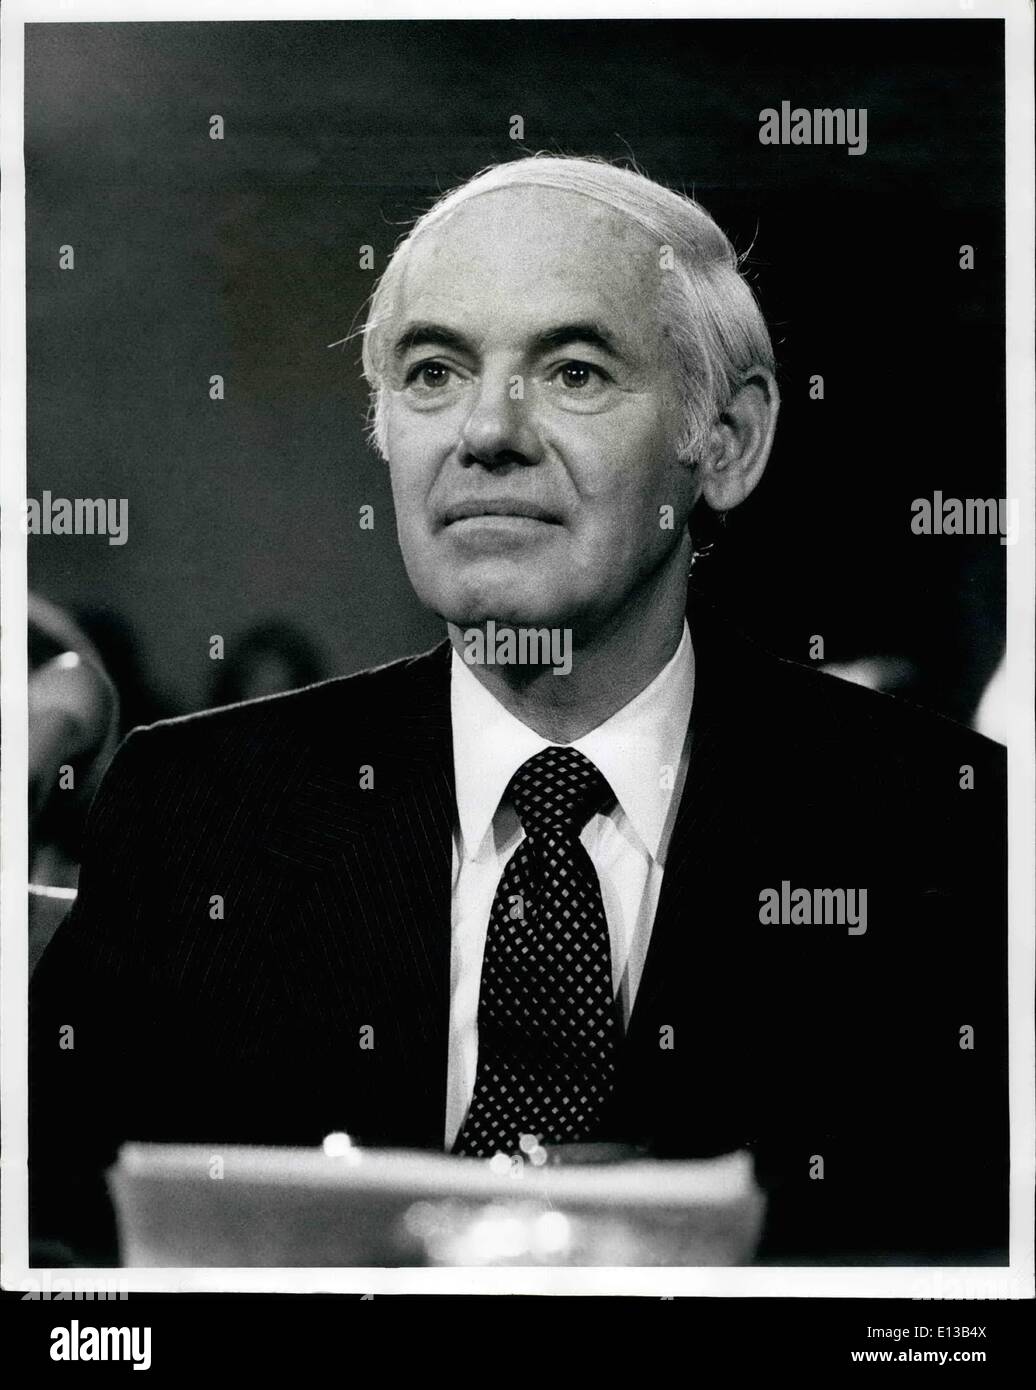 Feb. 29, 2012 - United States attorney general William French Smith. Stock Photo